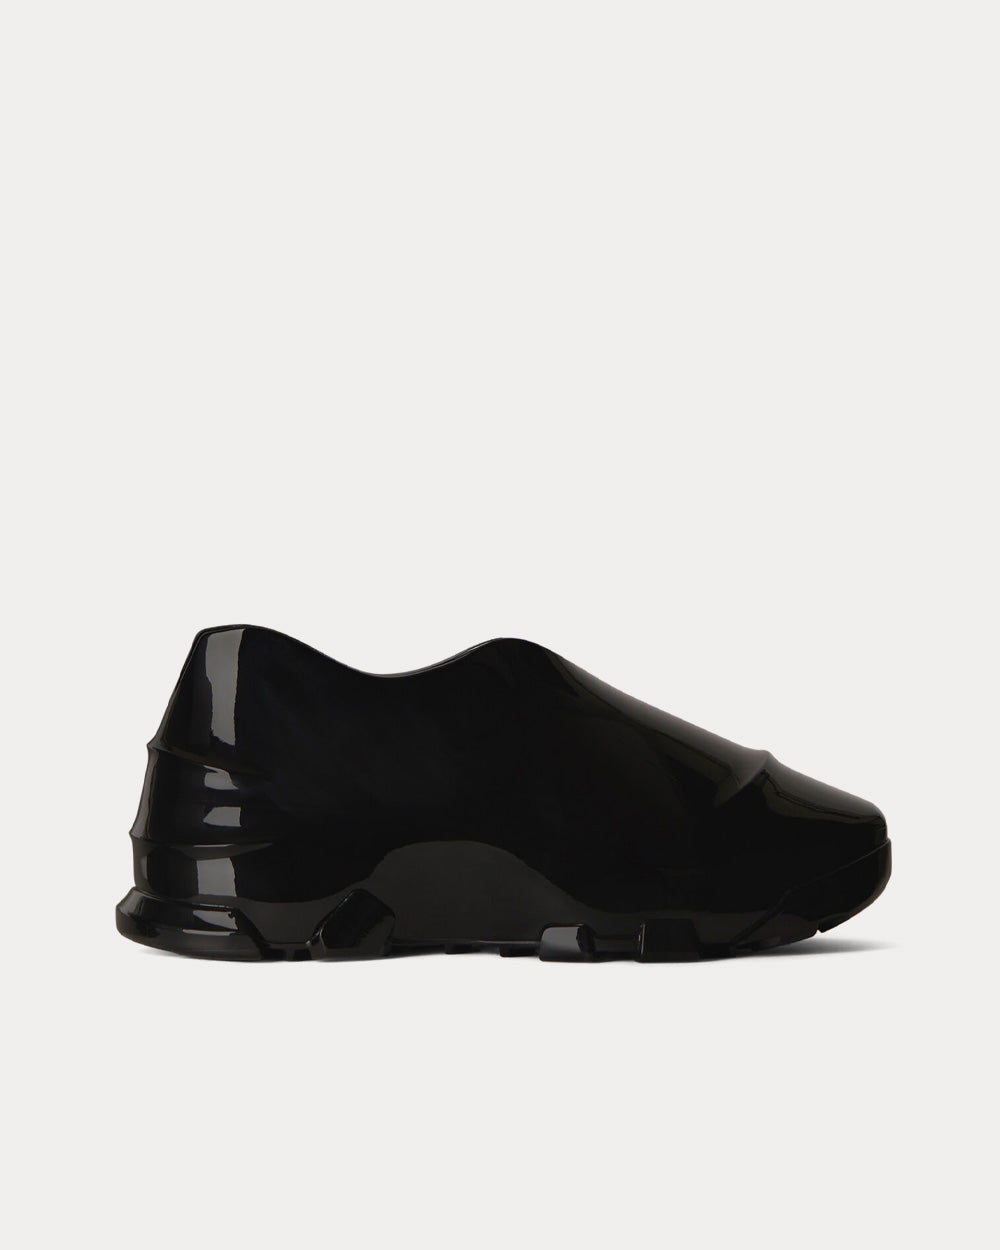 Givenchy Monumental Mallow Rubber Brown Slip On Sneakers